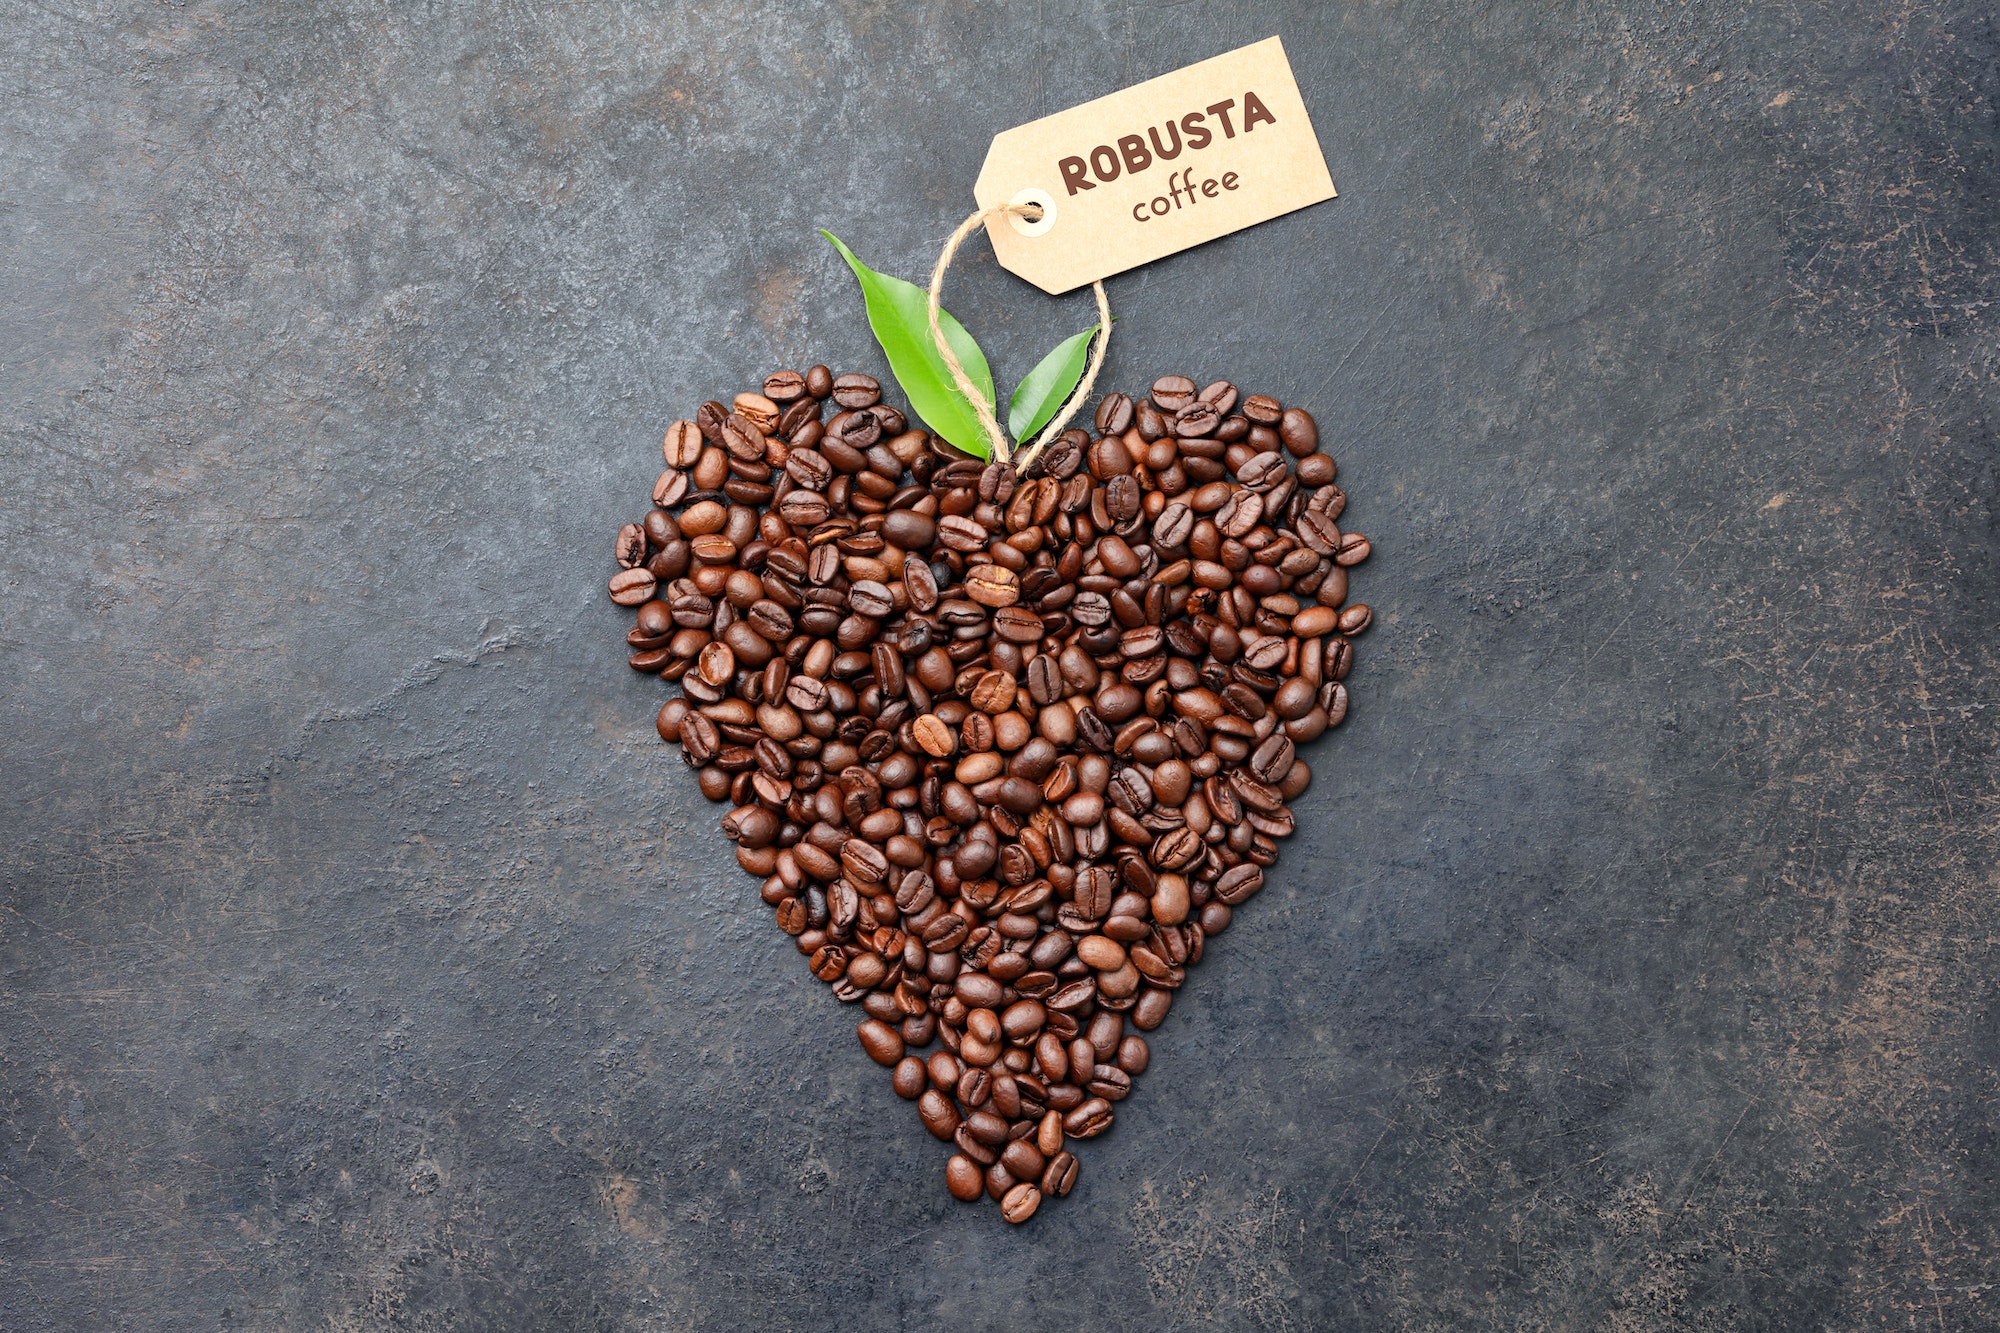 Robusta coffee beans in shape of heart on dark rustic background